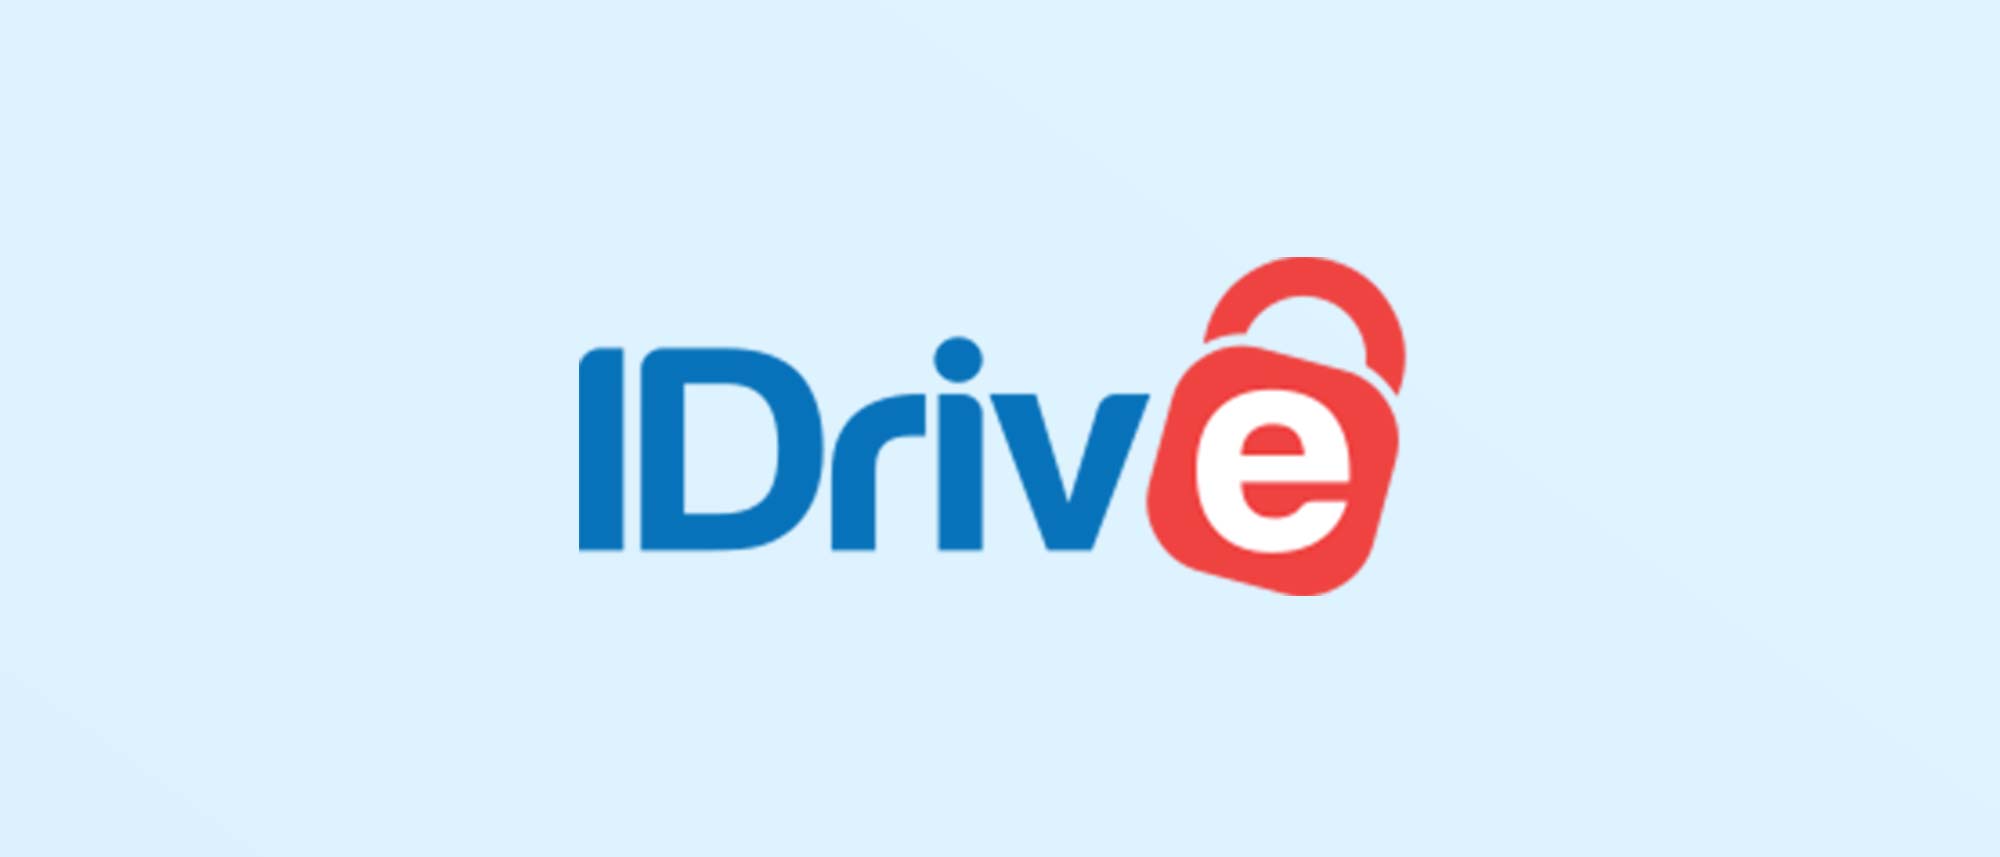 how to install idrive on another computer